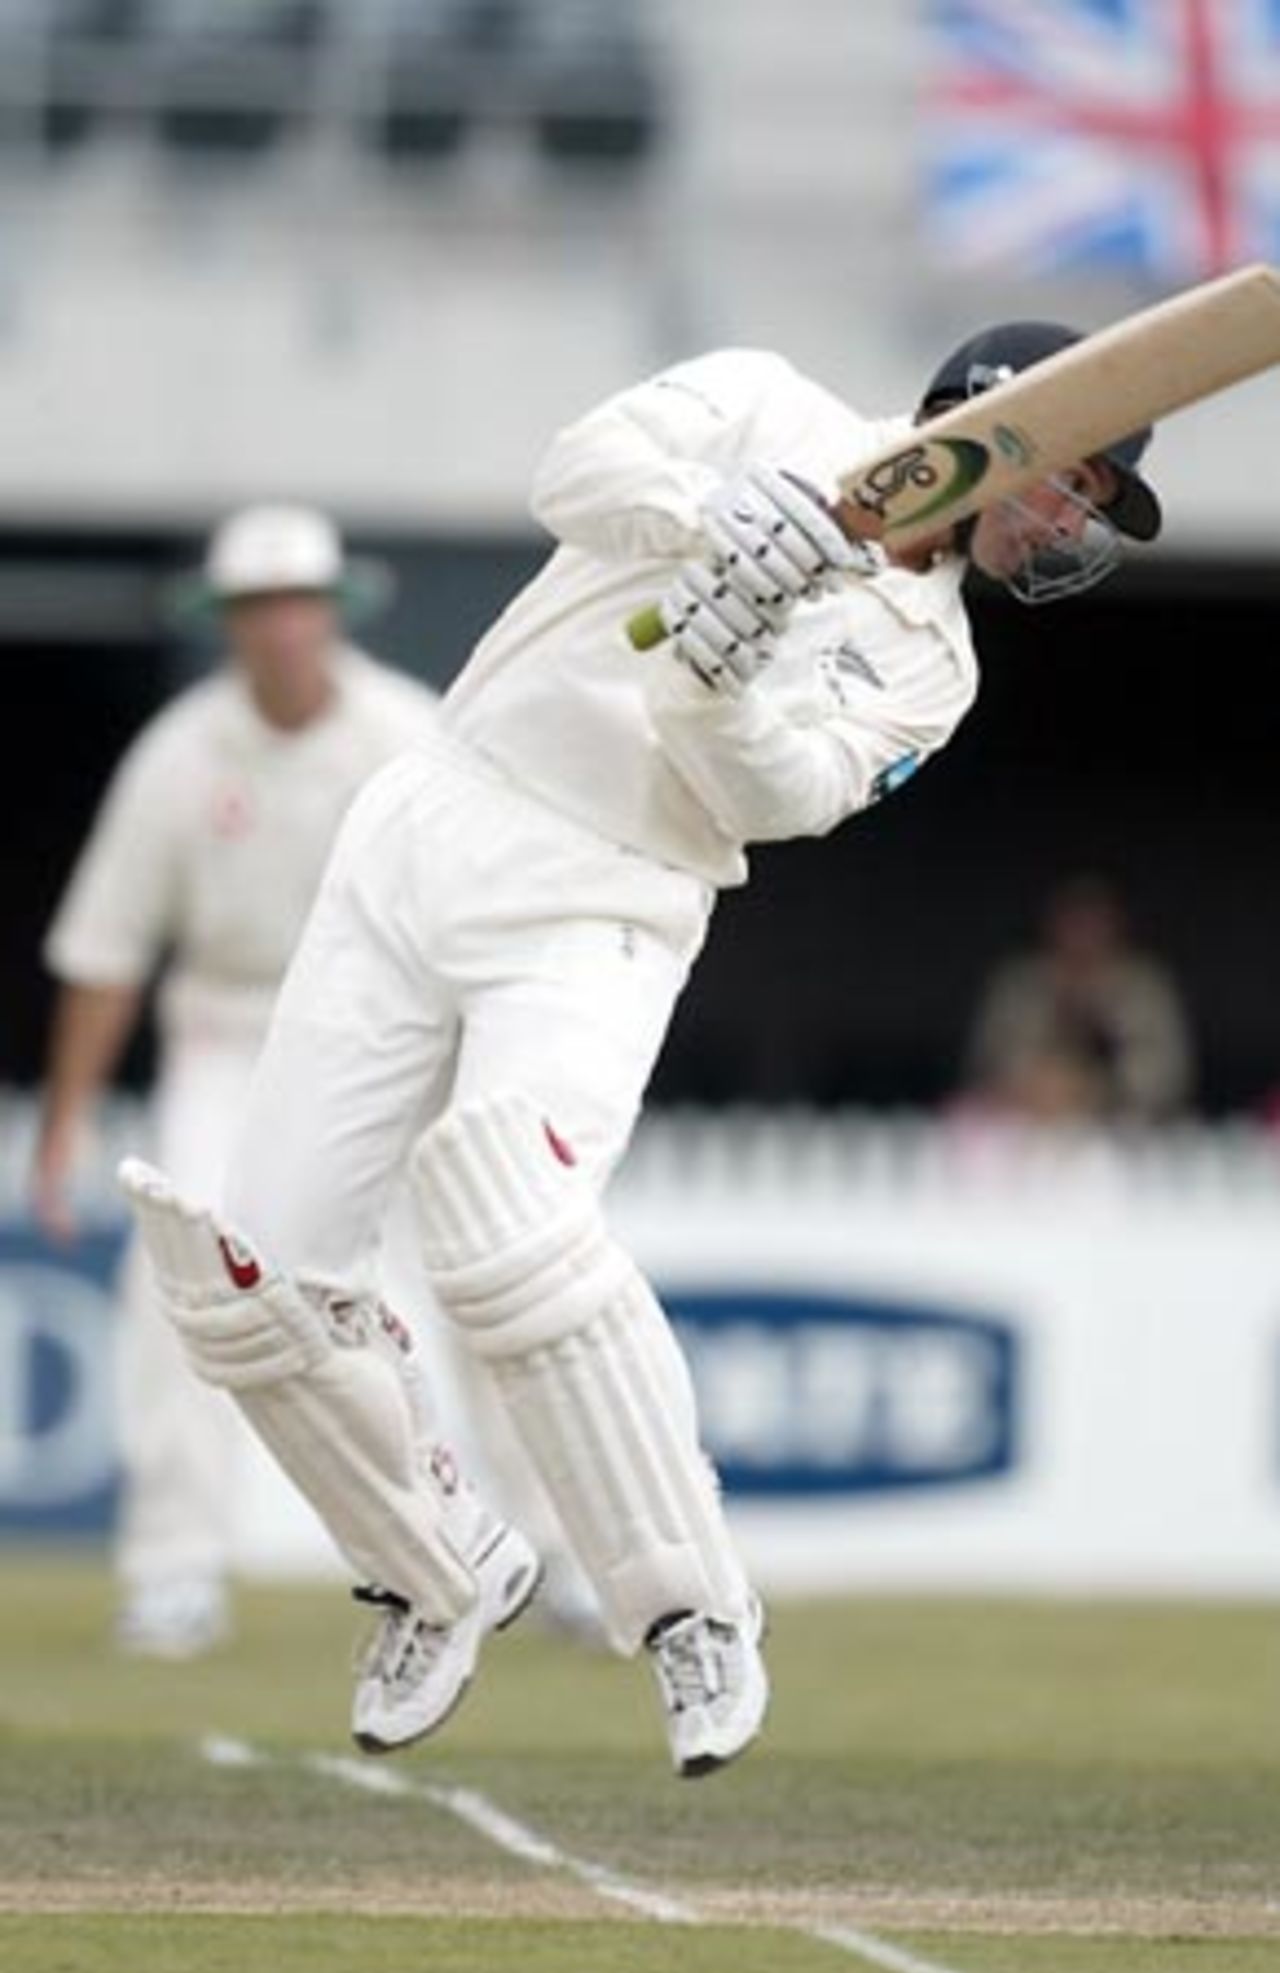 New Zealand batsman Nathan Astle jumps to hook a short delivery from England bowler Matthew Hoggard to the boundary during his second innings of 222. 1st Test: New Zealand v England at Jade Stadium, Christchurch, 13-17 March 2002 (16 March 2002).